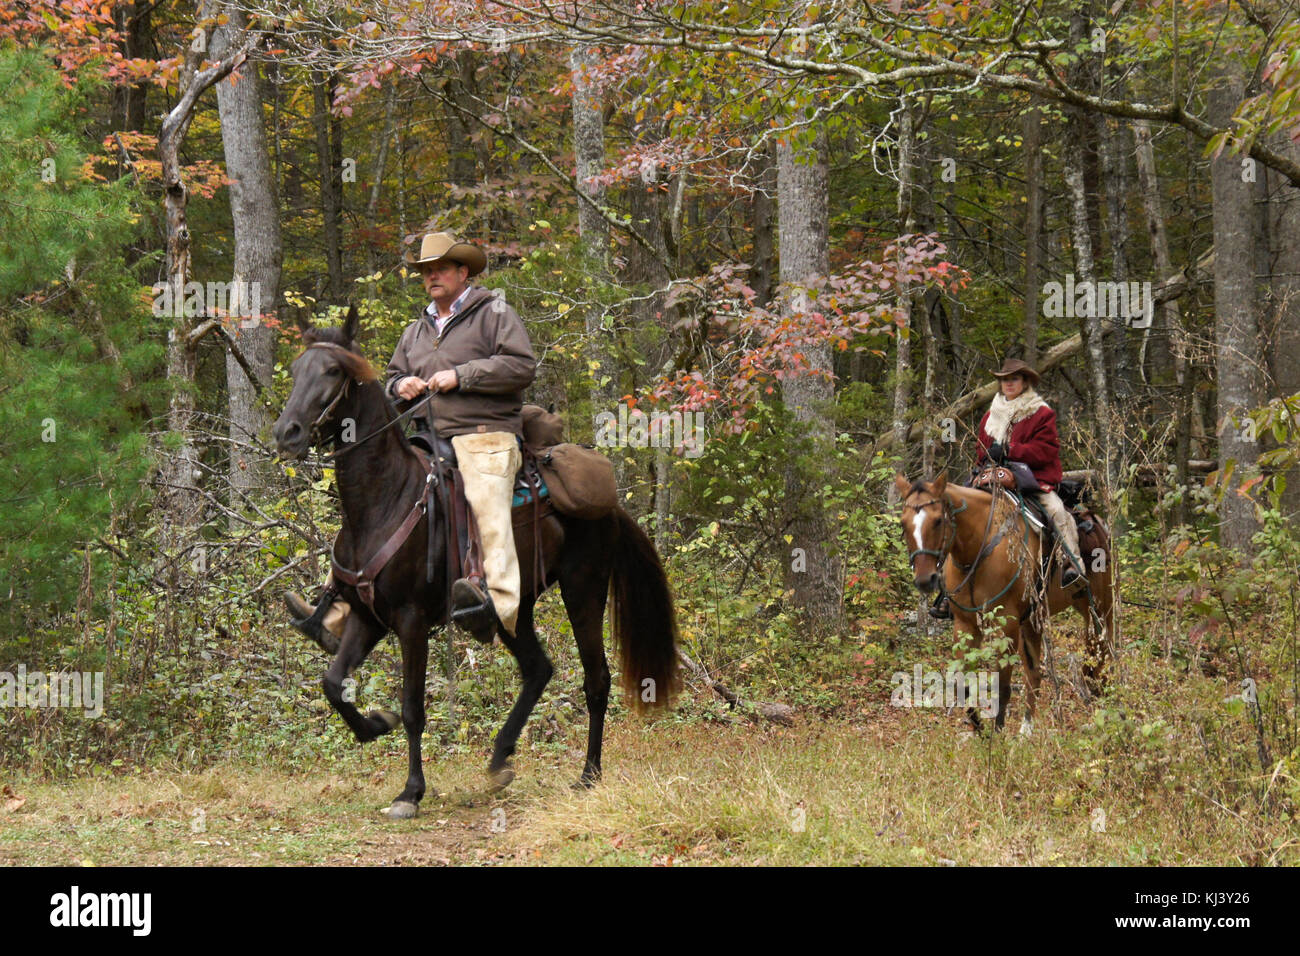 Trail riders amid autumn foliage, Cades Cove, Great Smoky Mountains National Park, Tennessee Stock Photo